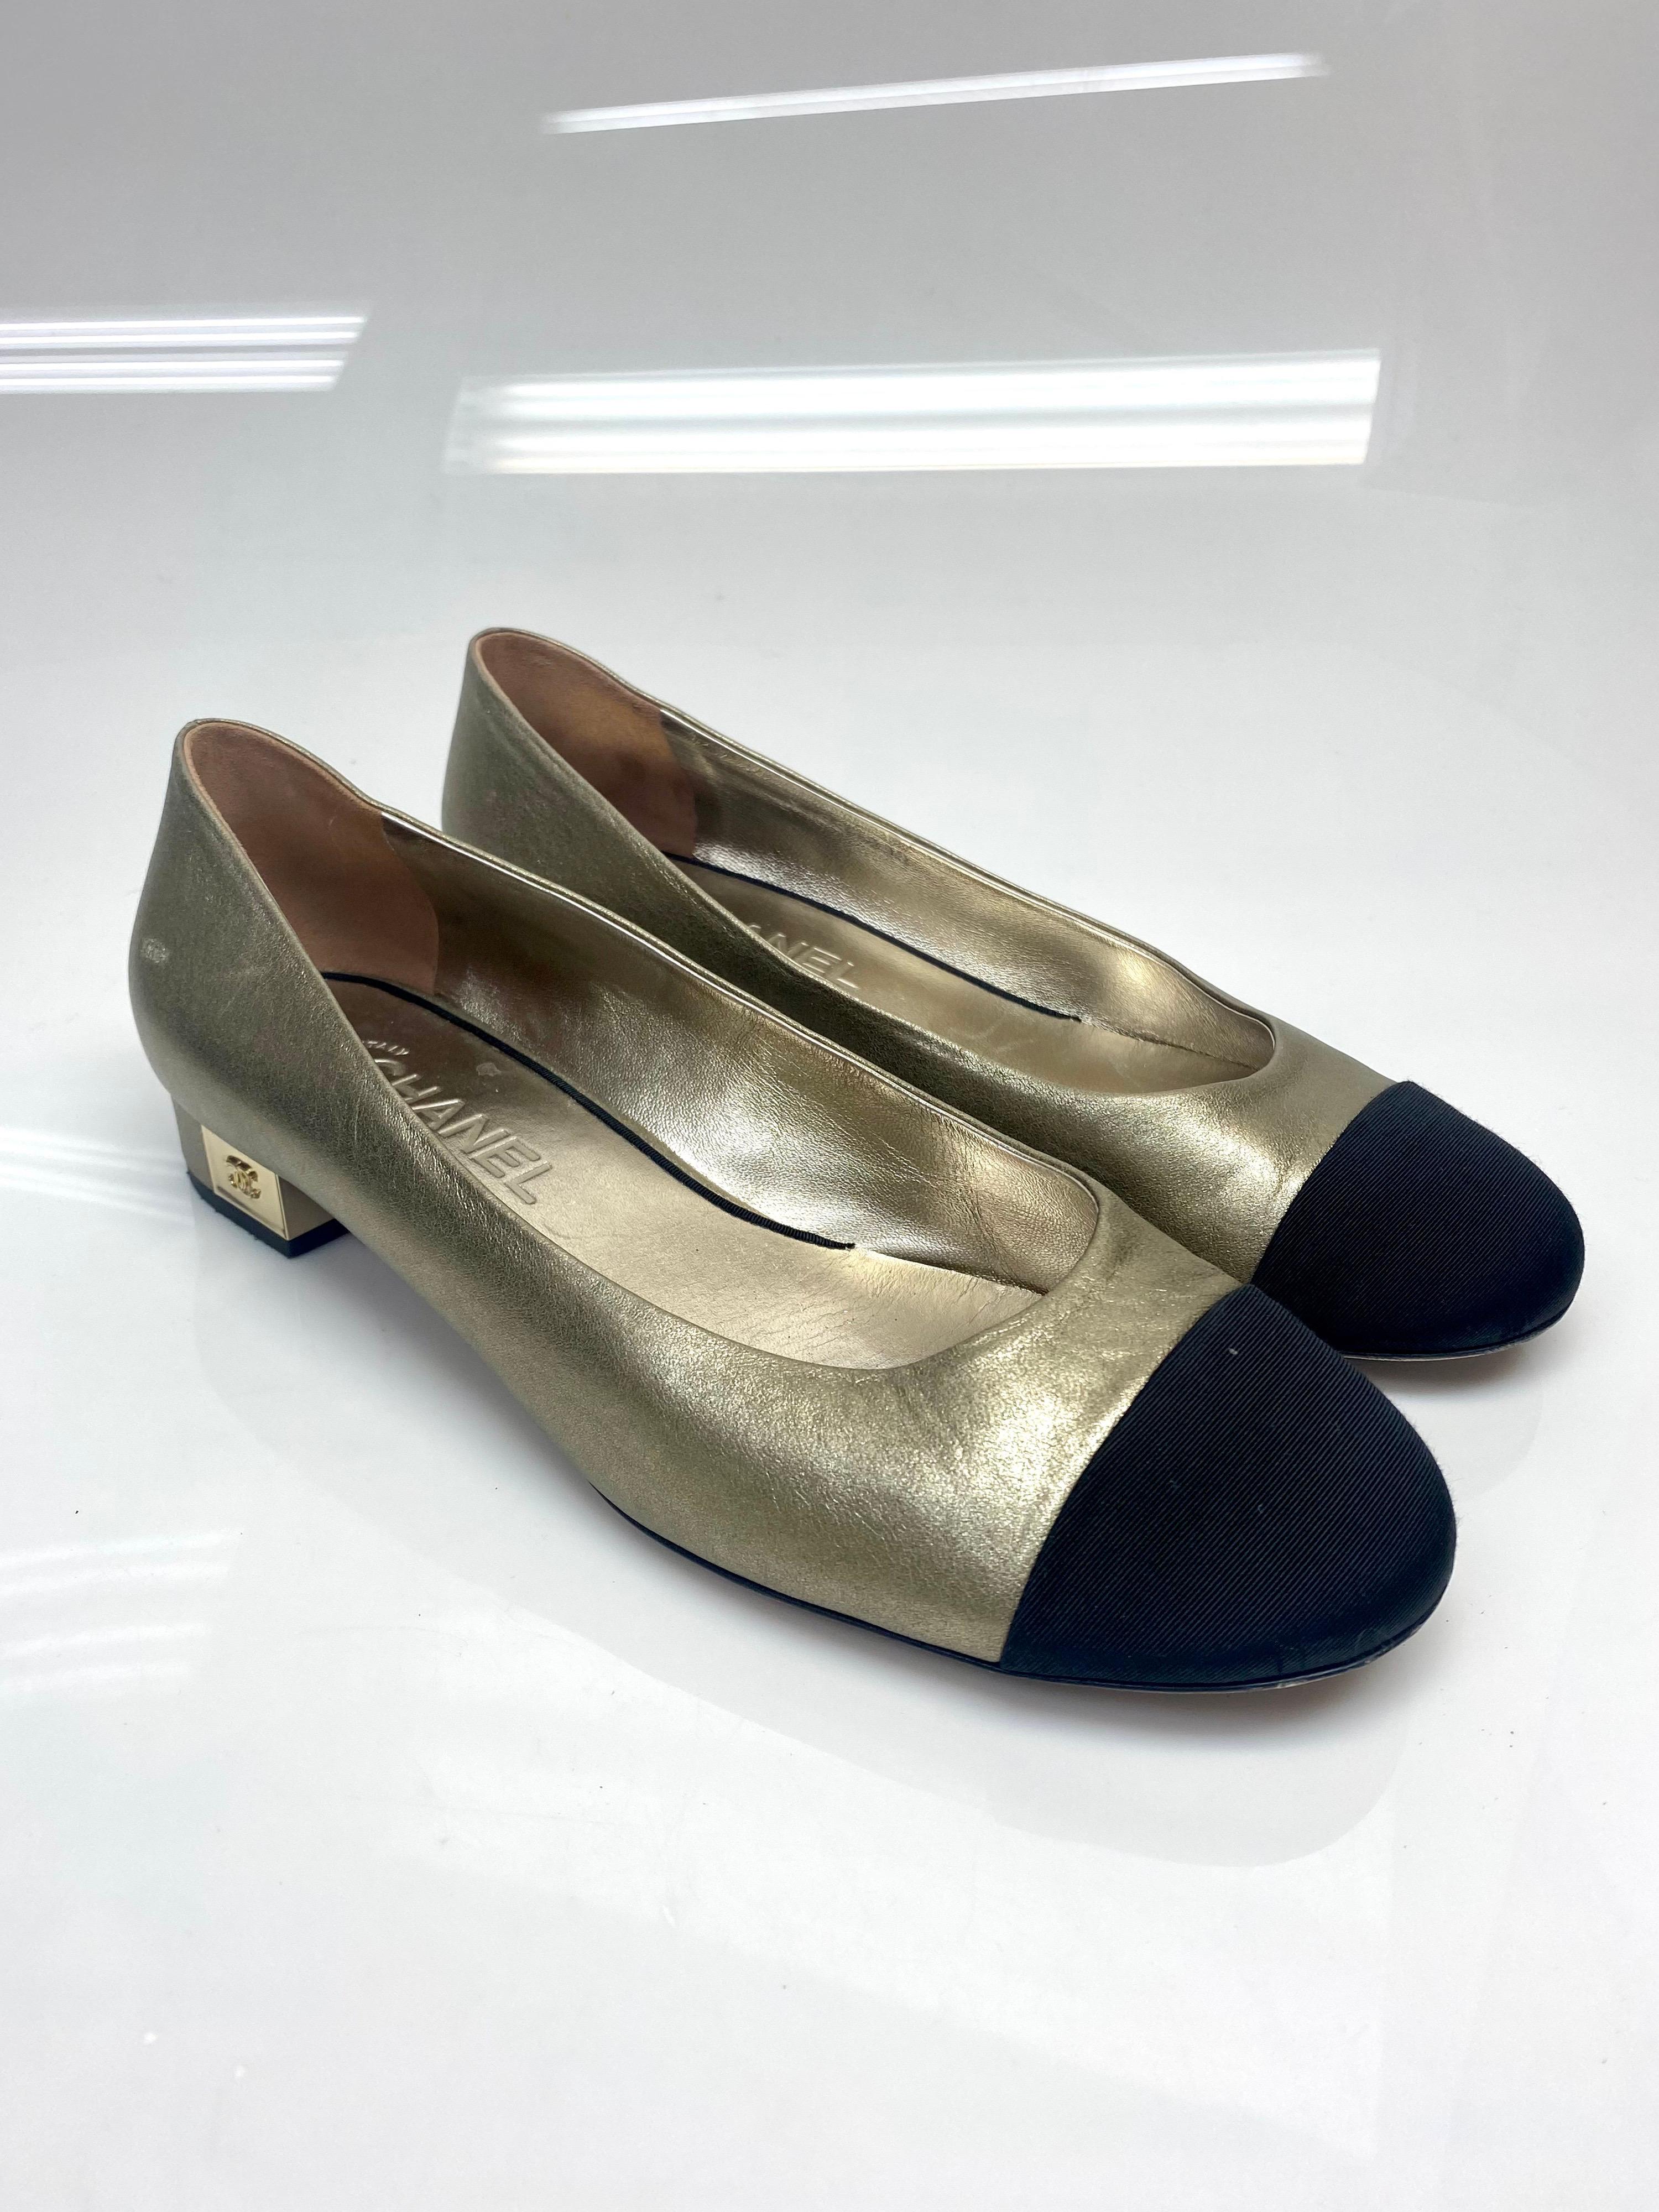 Chanel Bronze and Black Ballerina Pumps with Gold CC Detail Size 40.5. Beautiful Chanel two-toned bronze and black toe cap ballerina pumps. Featuring a black Silk Faille for the toe cap and a beautiful gold leather on the remainder of the shoe